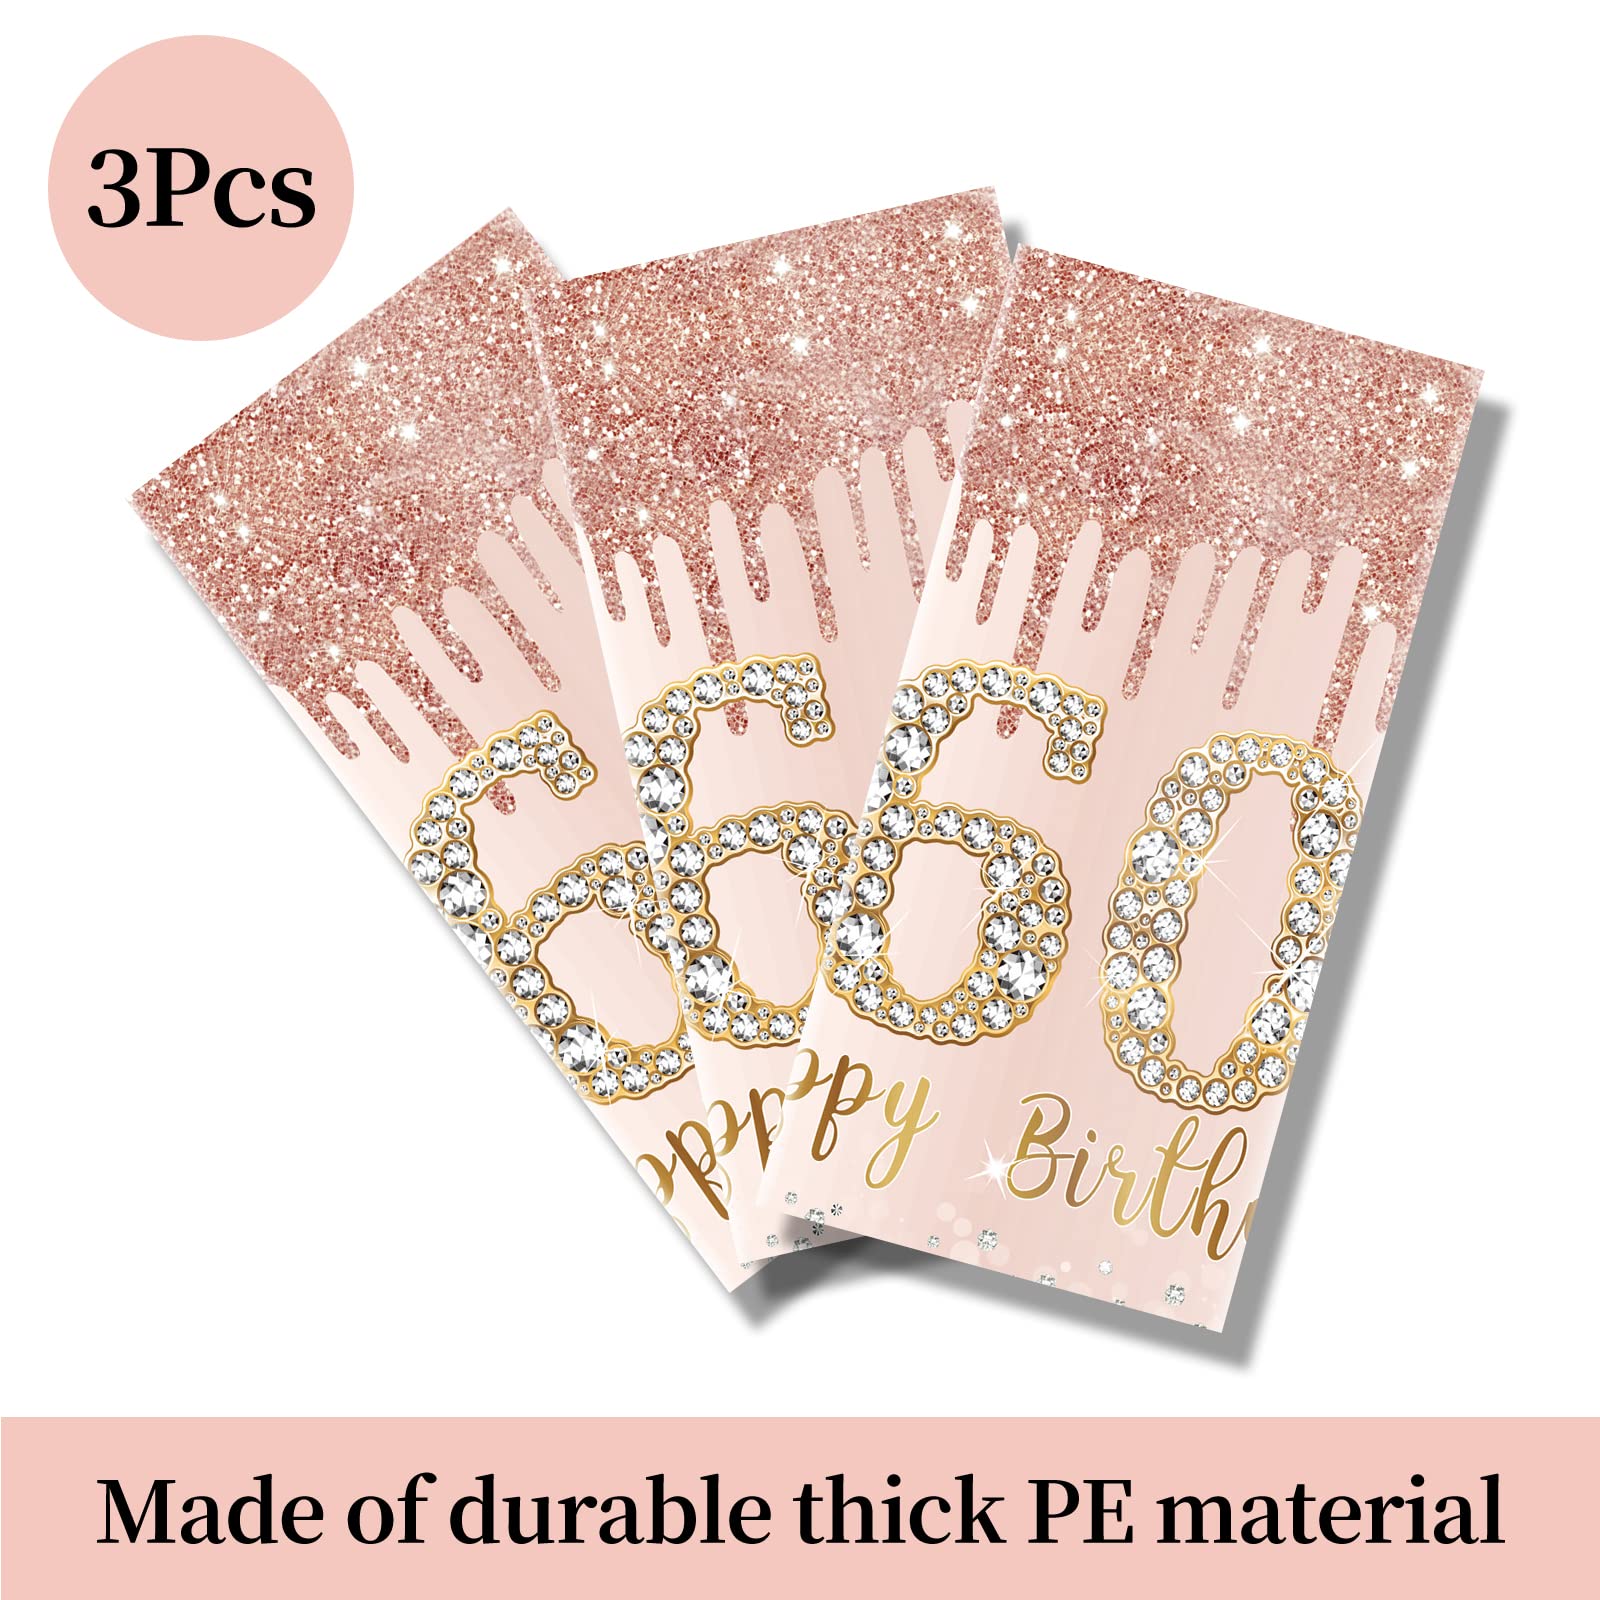 Excelloon 3 Pack 60th Birthday Tablecloth Decorations for Women, Pink Rose Gold Happy 60 Birthday Table Cover Party Supplies, Sixty Year Old Birthday Plastic Disposable Rectangular Table Cloth Decor